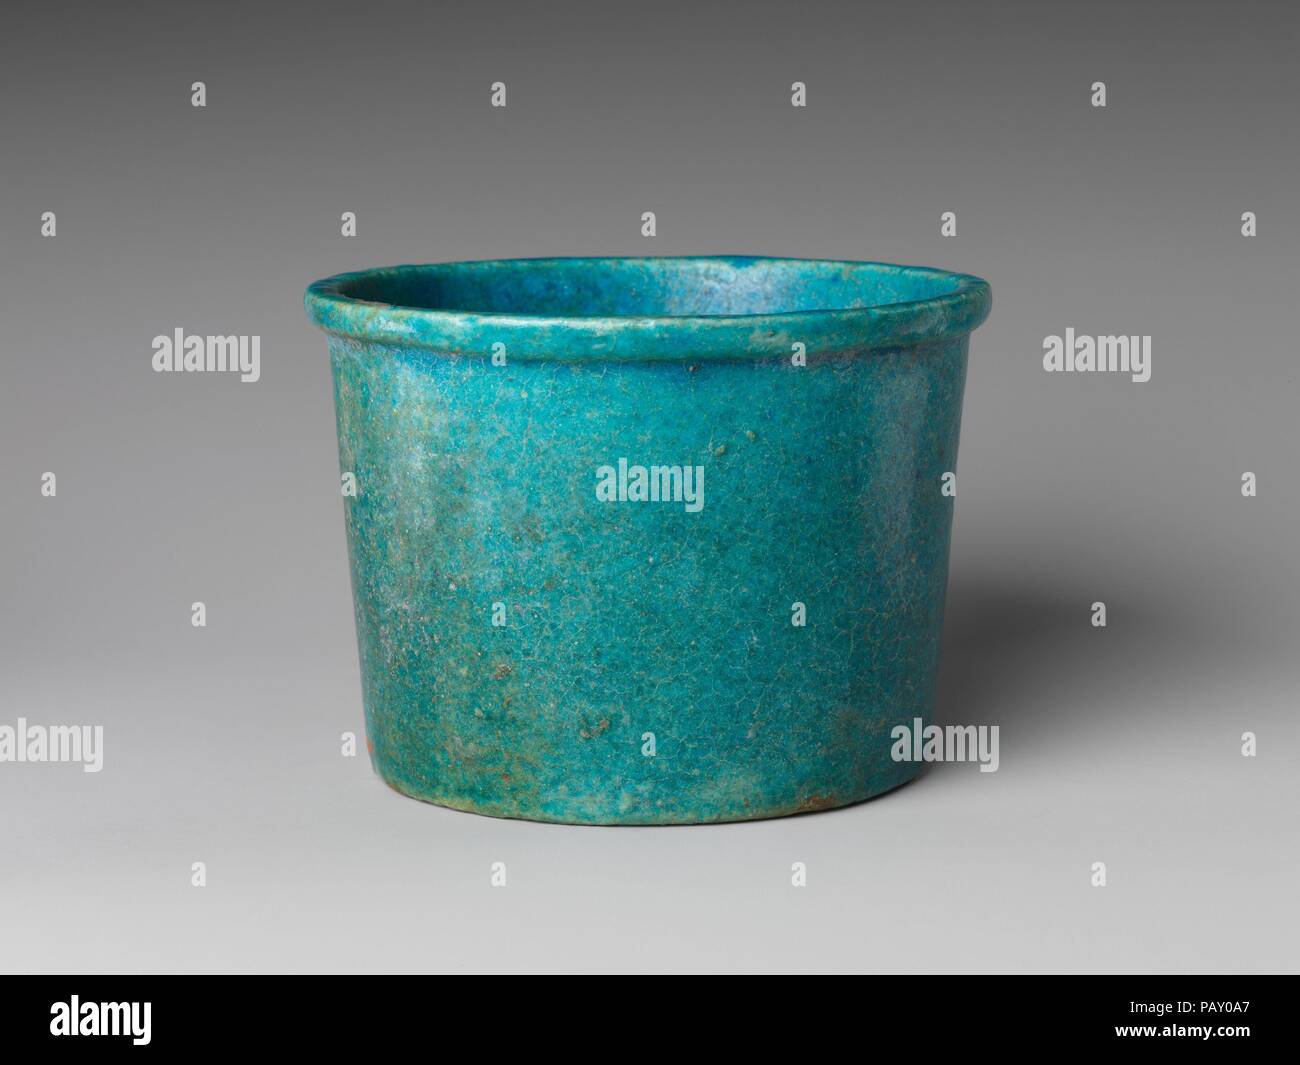 Cup. Dimensions: H. 9.3 x dia. 13 cm (3 11/16 x 5 1/8 in). Date: 500-200 B.C..  Faience cups of this type are frequent in the Late Period. A recent study of faience vessels notes that examples were found in the western dump at the Sacred Animal Necropolis at Saqqara, where datable documents belong to the 5th-4th centuries B.C. The cups vary in size; examples are known that were inscribed and found in sets of 7 for the 7 sacred oils. The type may have continued to be produced during the Graeco-Roman period, but the quality of the glaze here - very thick and most often with craquelure in a regul Stock Photo